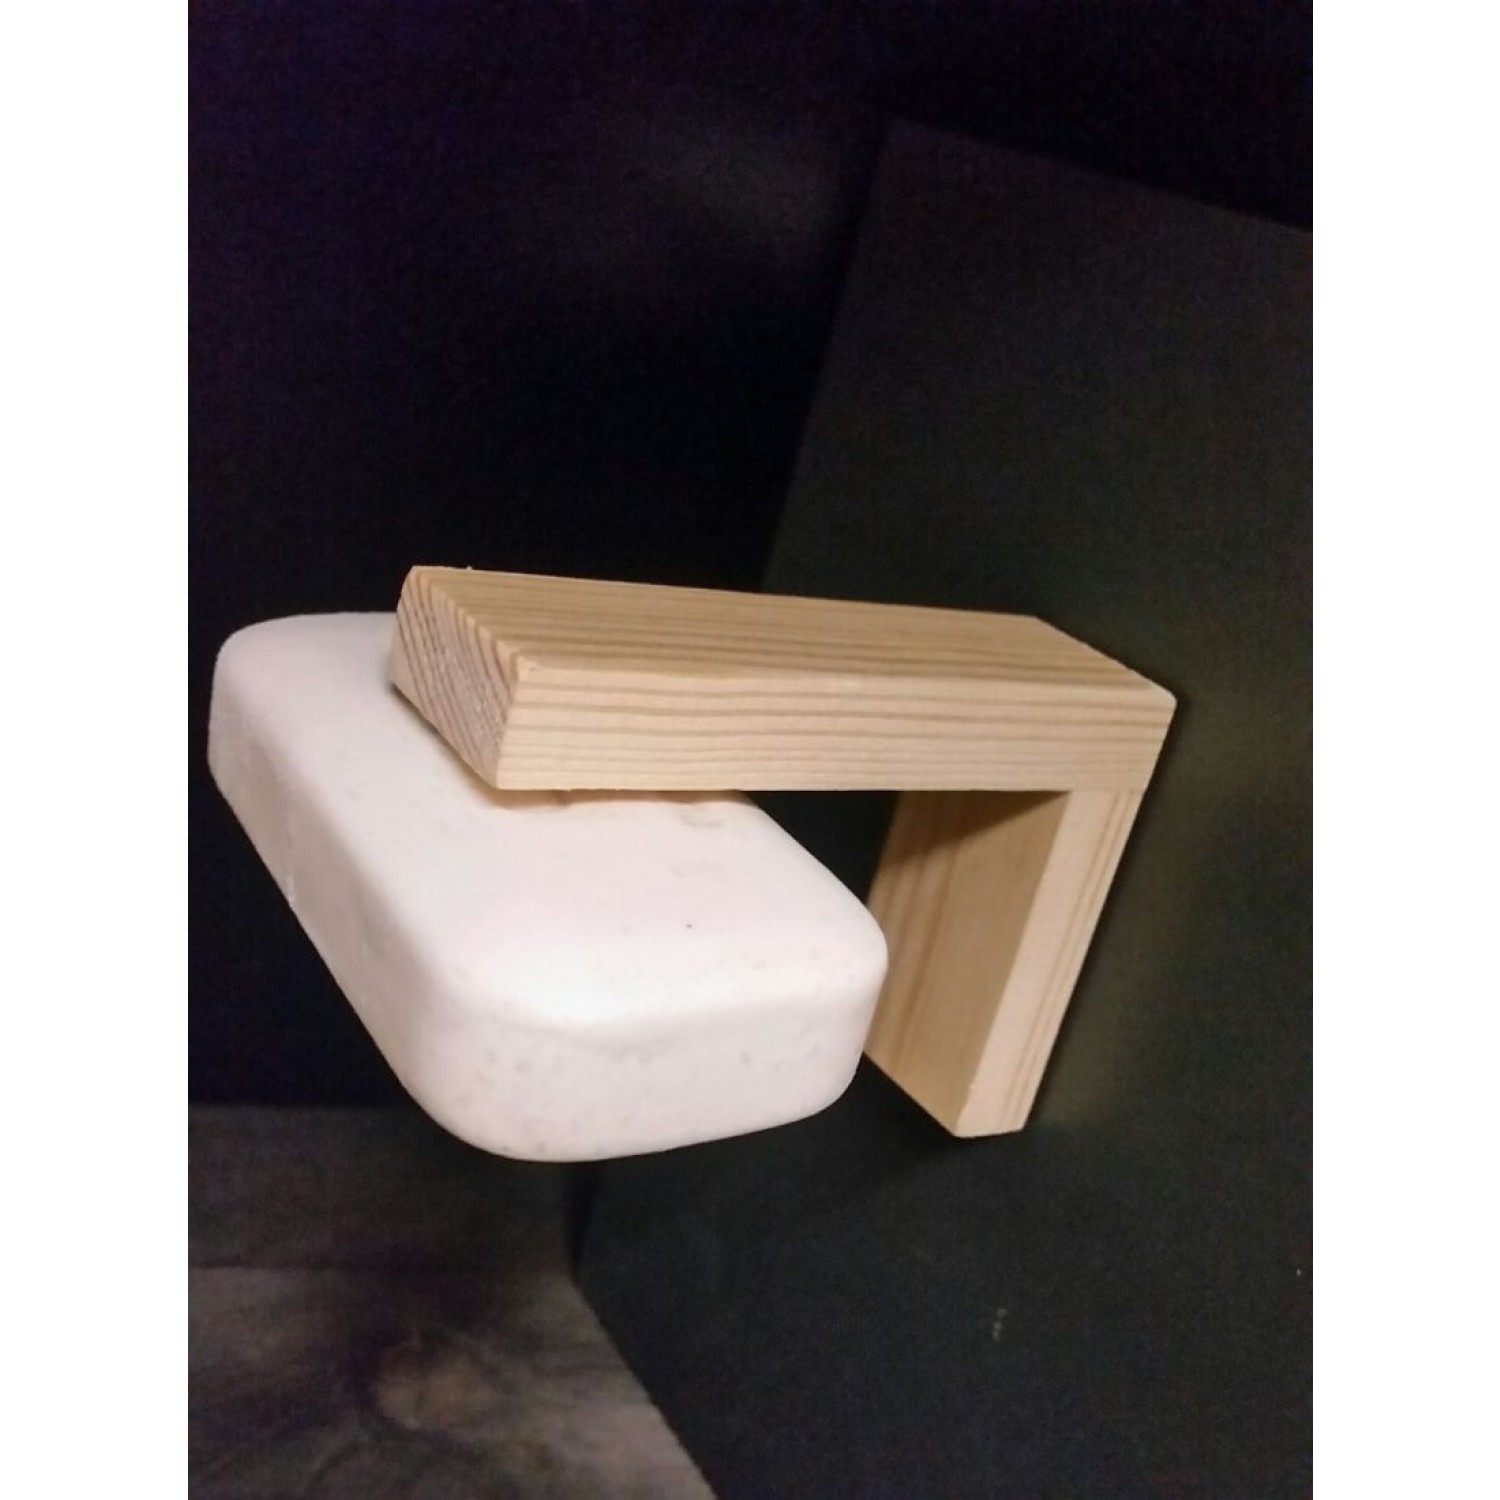 Eco Magnetic Soap Holder local wood » D.O.M.